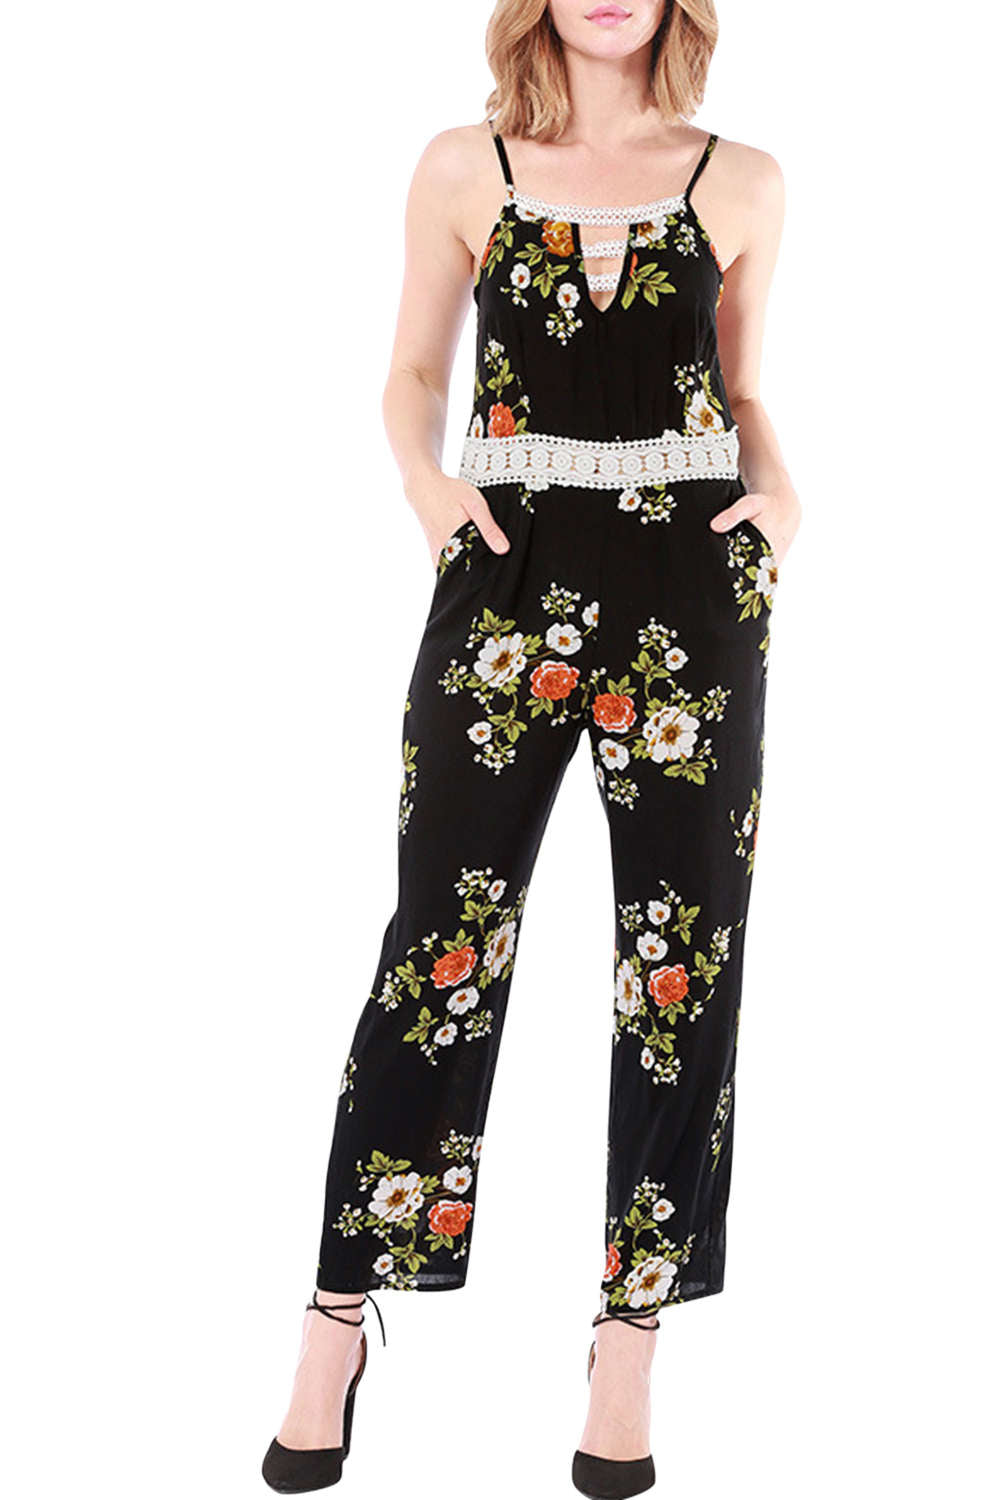 Iyasson Women's Floral Print Jumpsuits